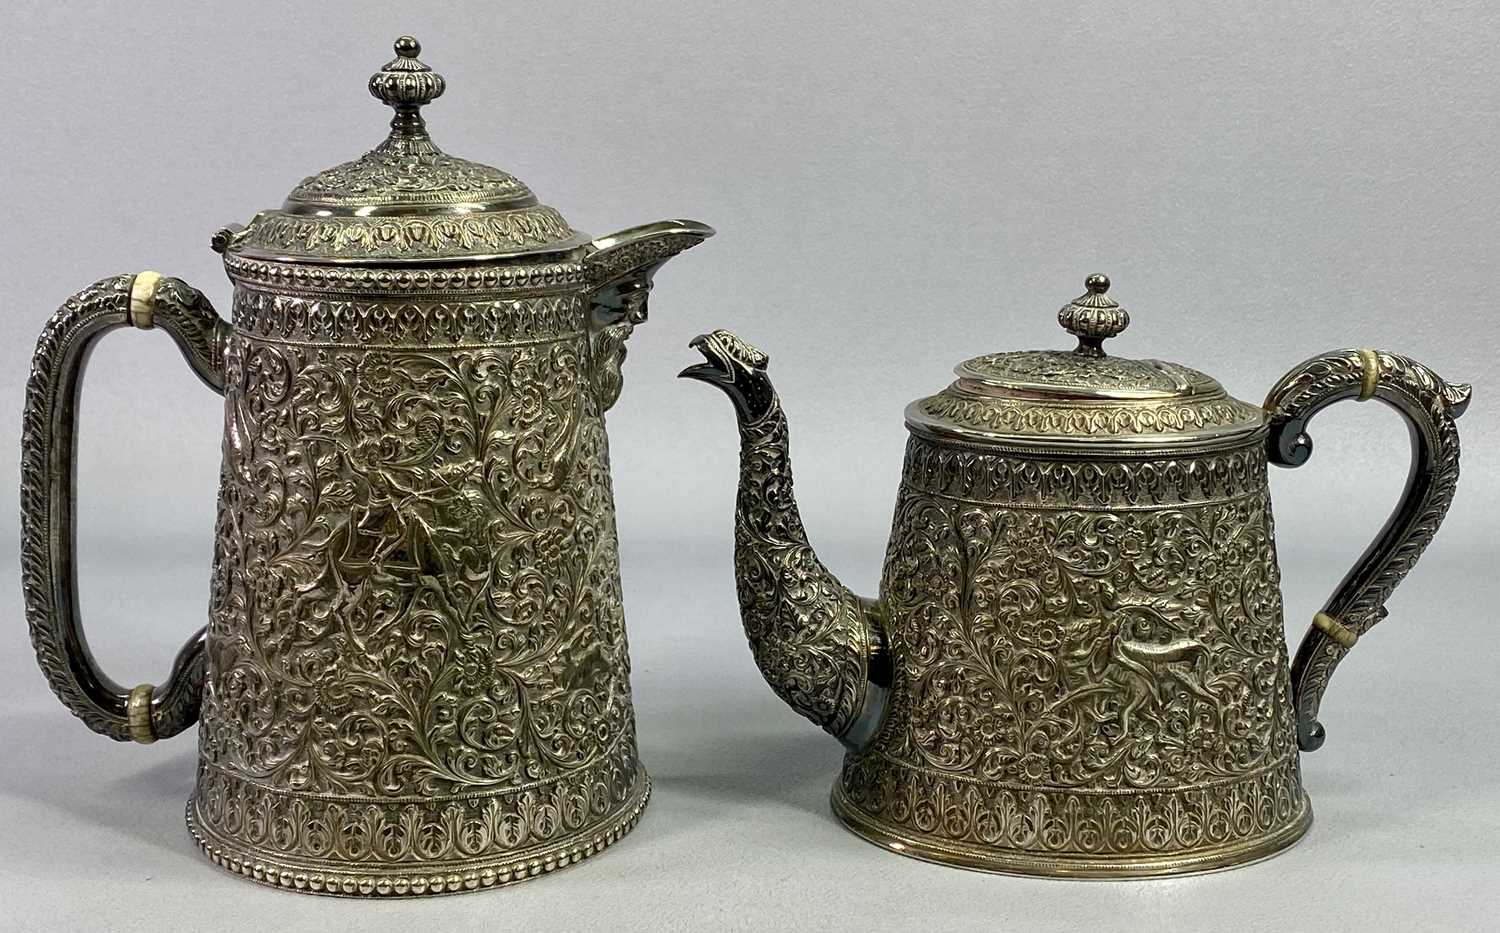 BURMESE STYLE WHITE METAL TEAPOT - repousse chased design with animals hunting, scrolls and flowers, - Image 2 of 5